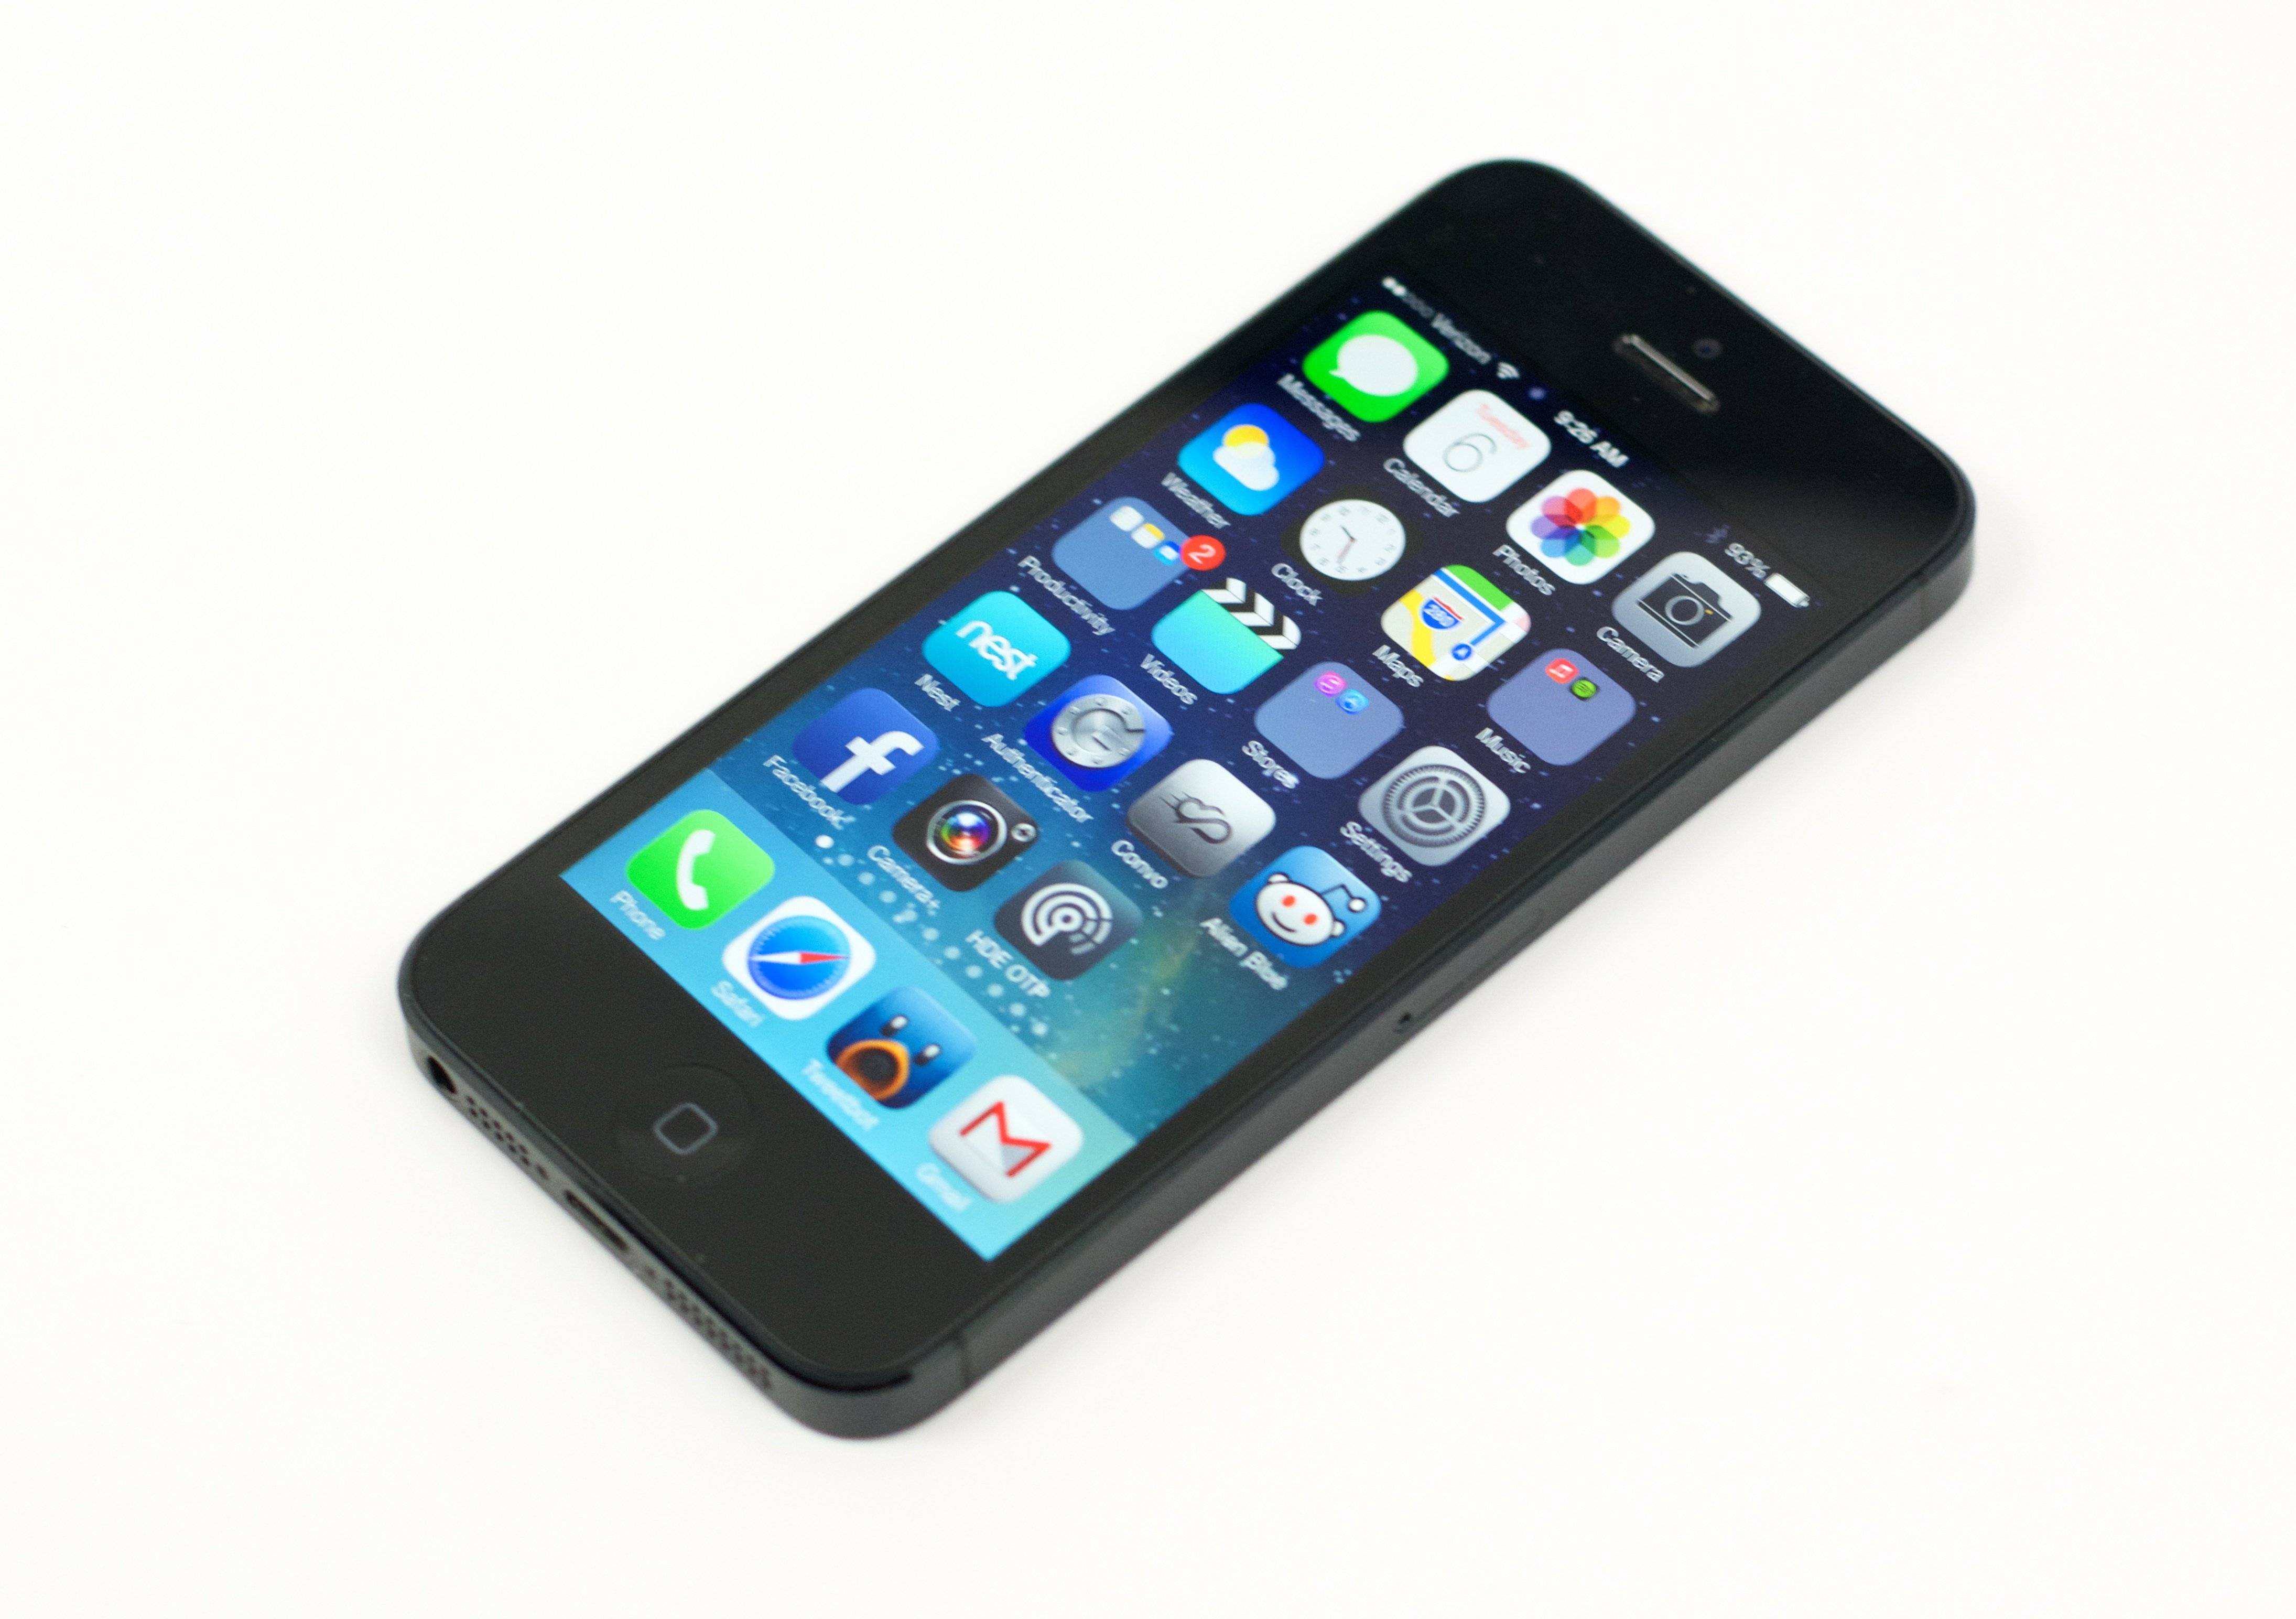 iPhone 5S pre-orders could sell out fast and an iPhone 5S release date could arrive with short supply according to new rumors.